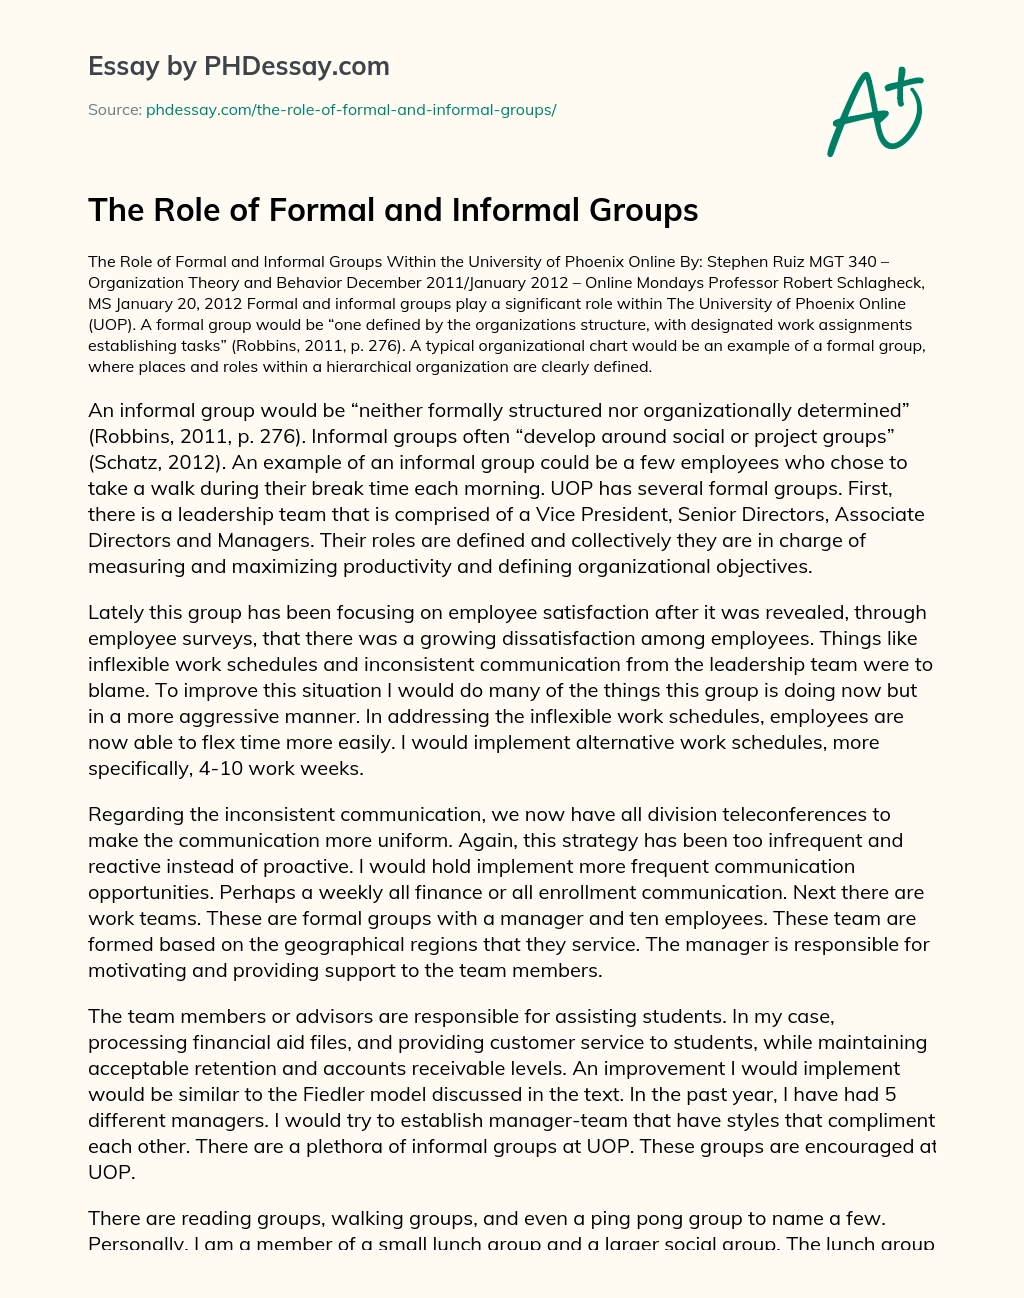 The Role of Formal and Informal Groups essay